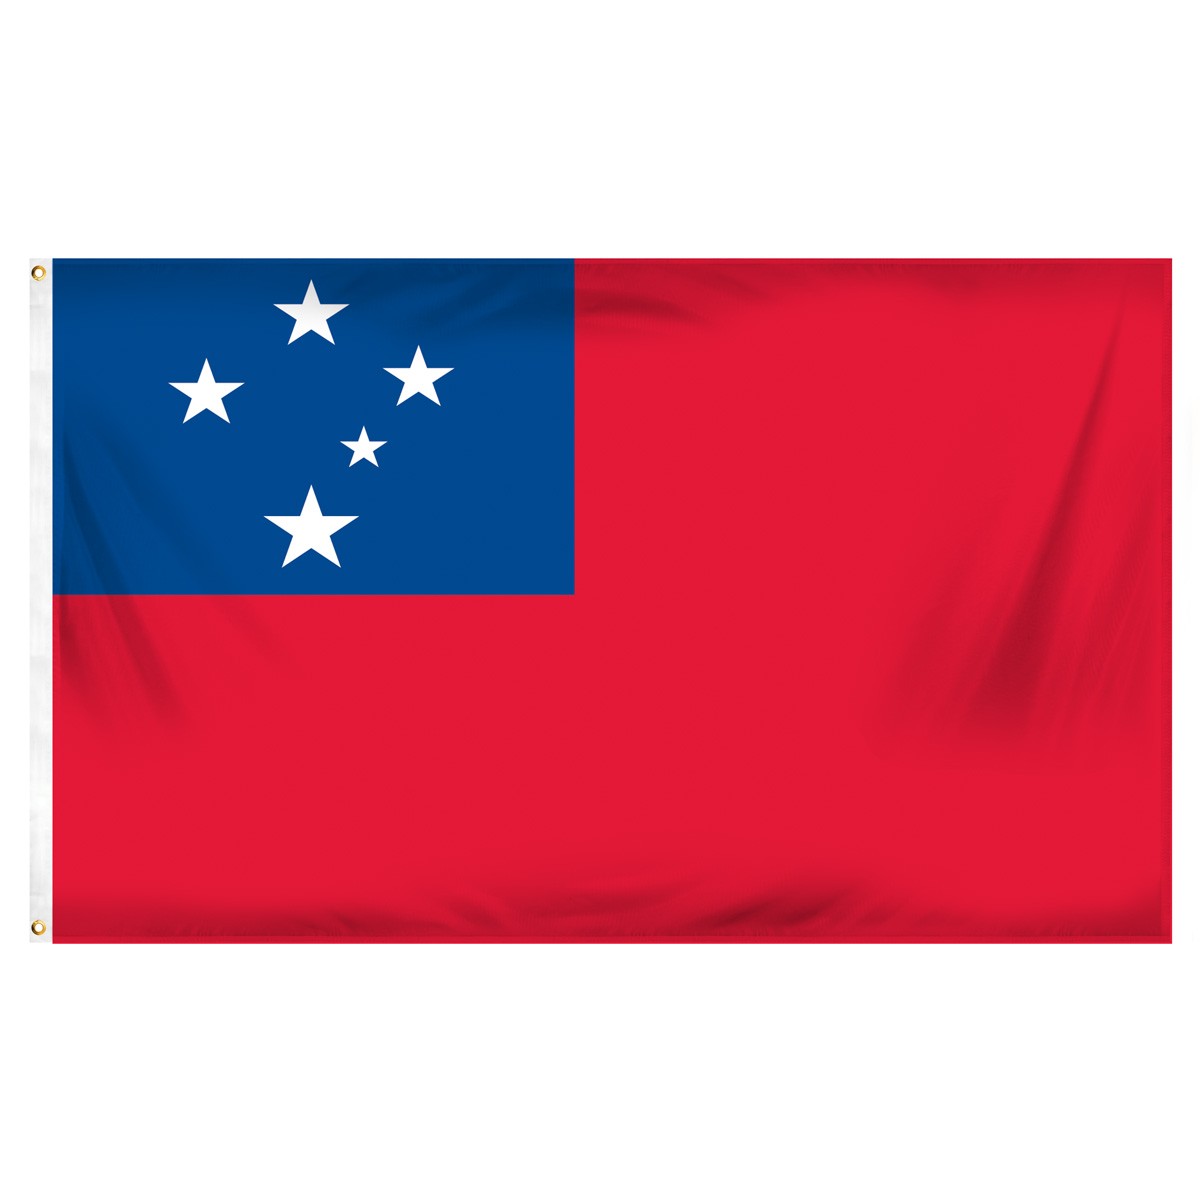 Samoa Submit Flags and Flags